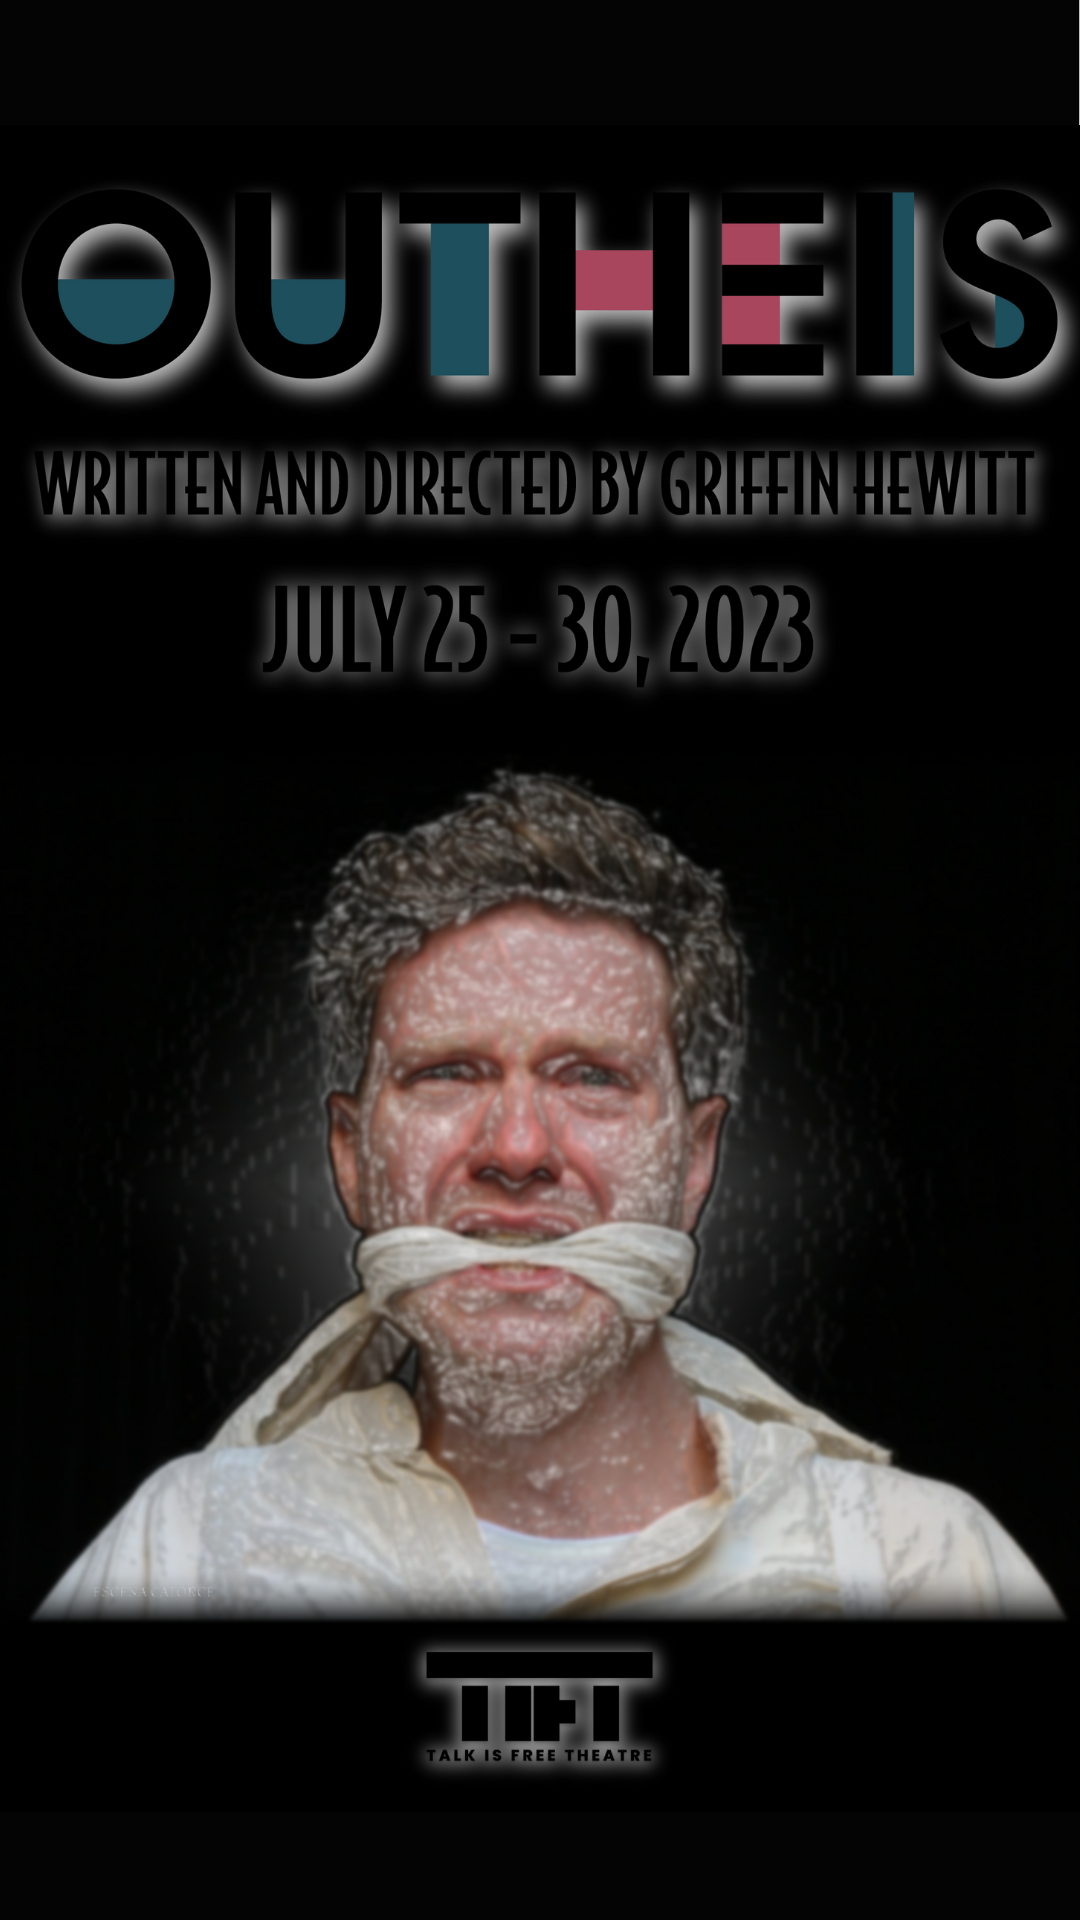 Poster for 'Outheis' A man is seen with a cloth in his mouth that has been wrapped behind his head Text reads: "OUTHEIS WRITTEN AND DIRECTED BY GRIFFIN HEWITT JULY 25 -30, 2023 TALK IS FREE THEATRE"